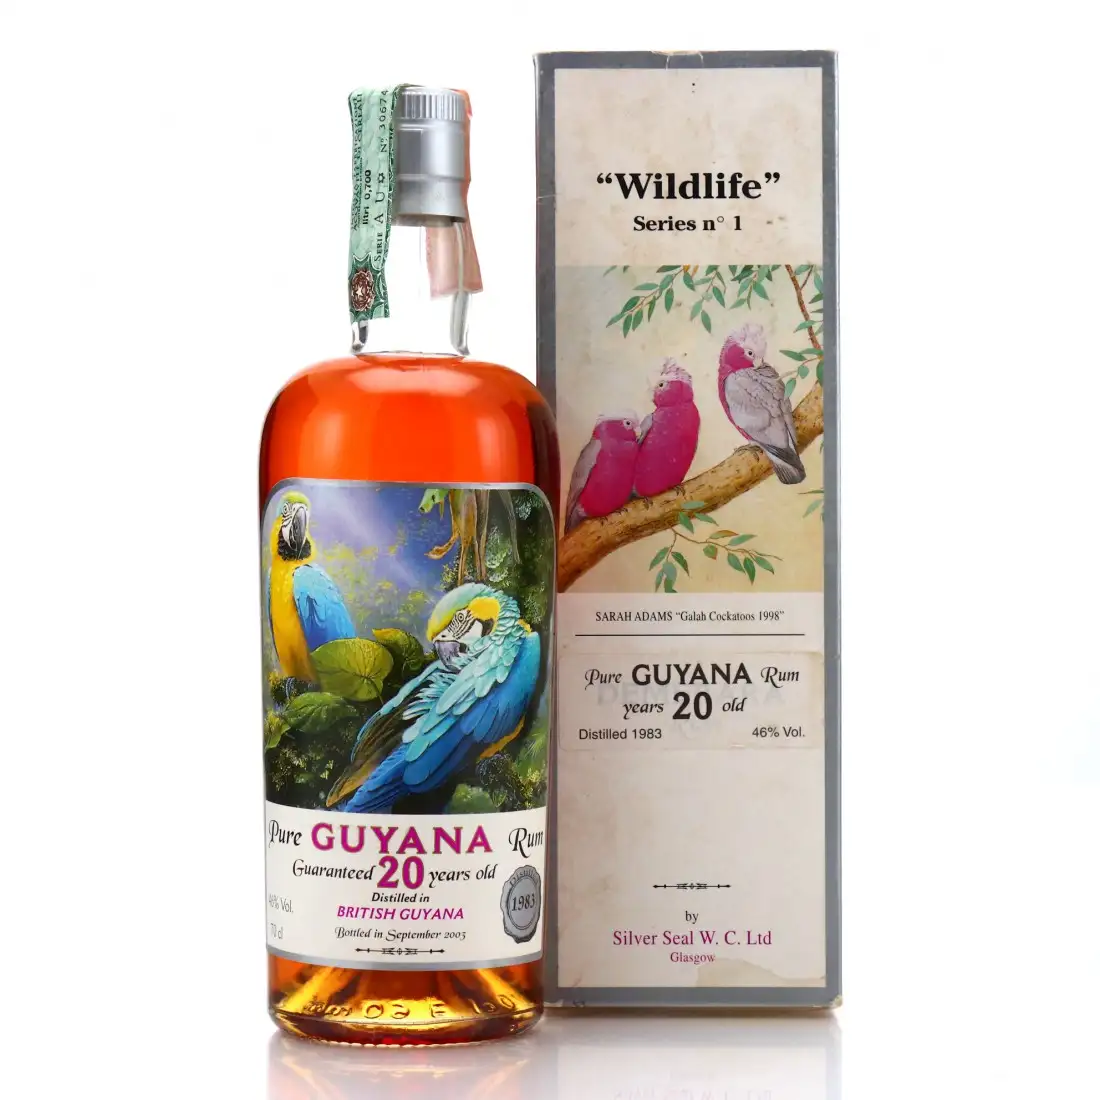 Image of the front of the bottle of the rum Pure Guyana Rum Wildlife Series No. 1